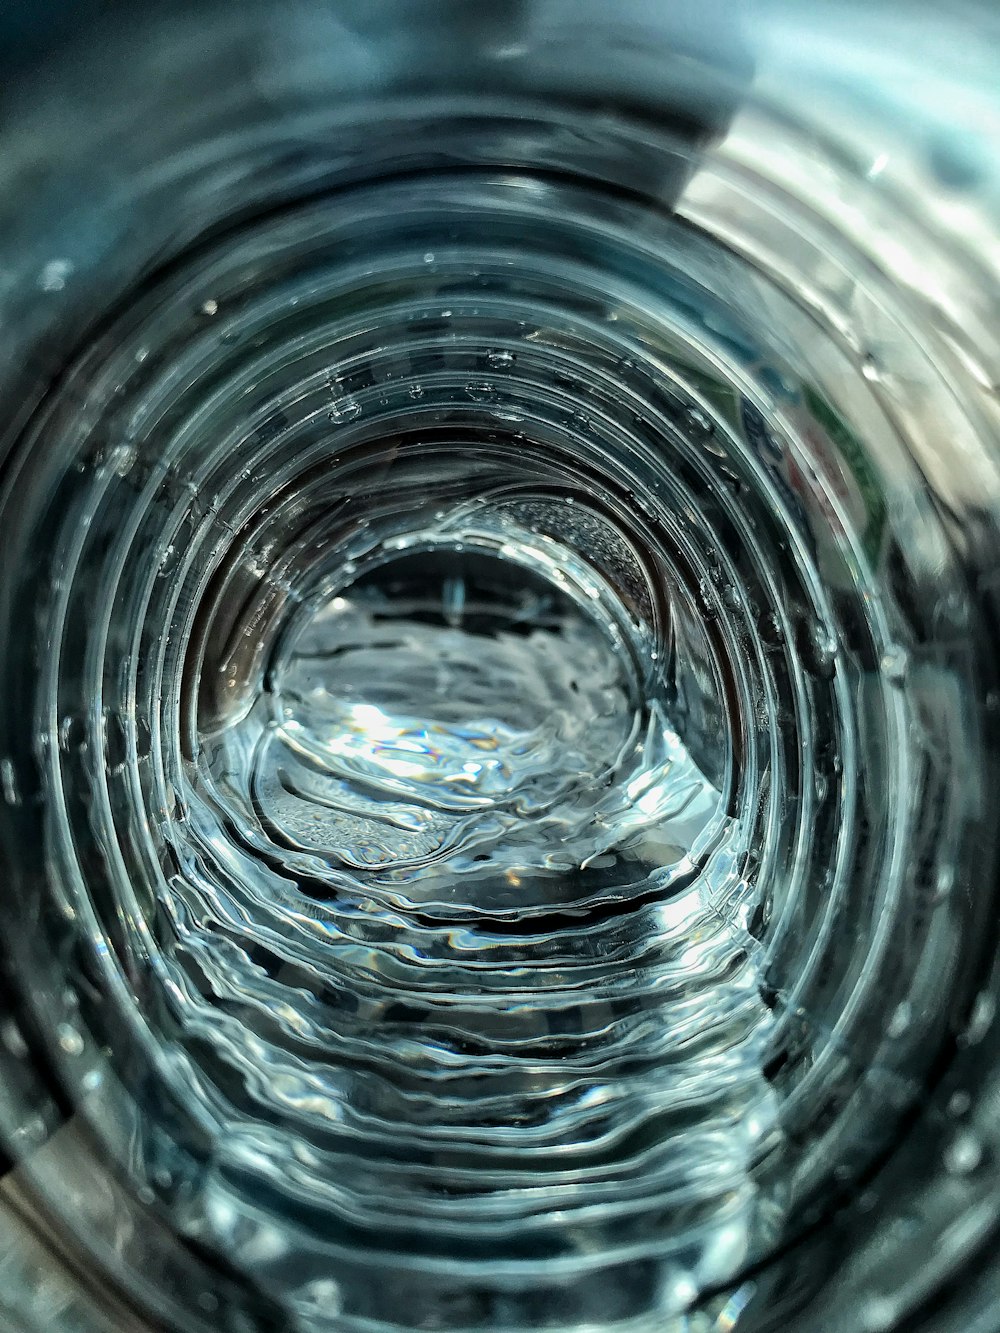 time lapse photography of rippling water inside clear plastic bottle